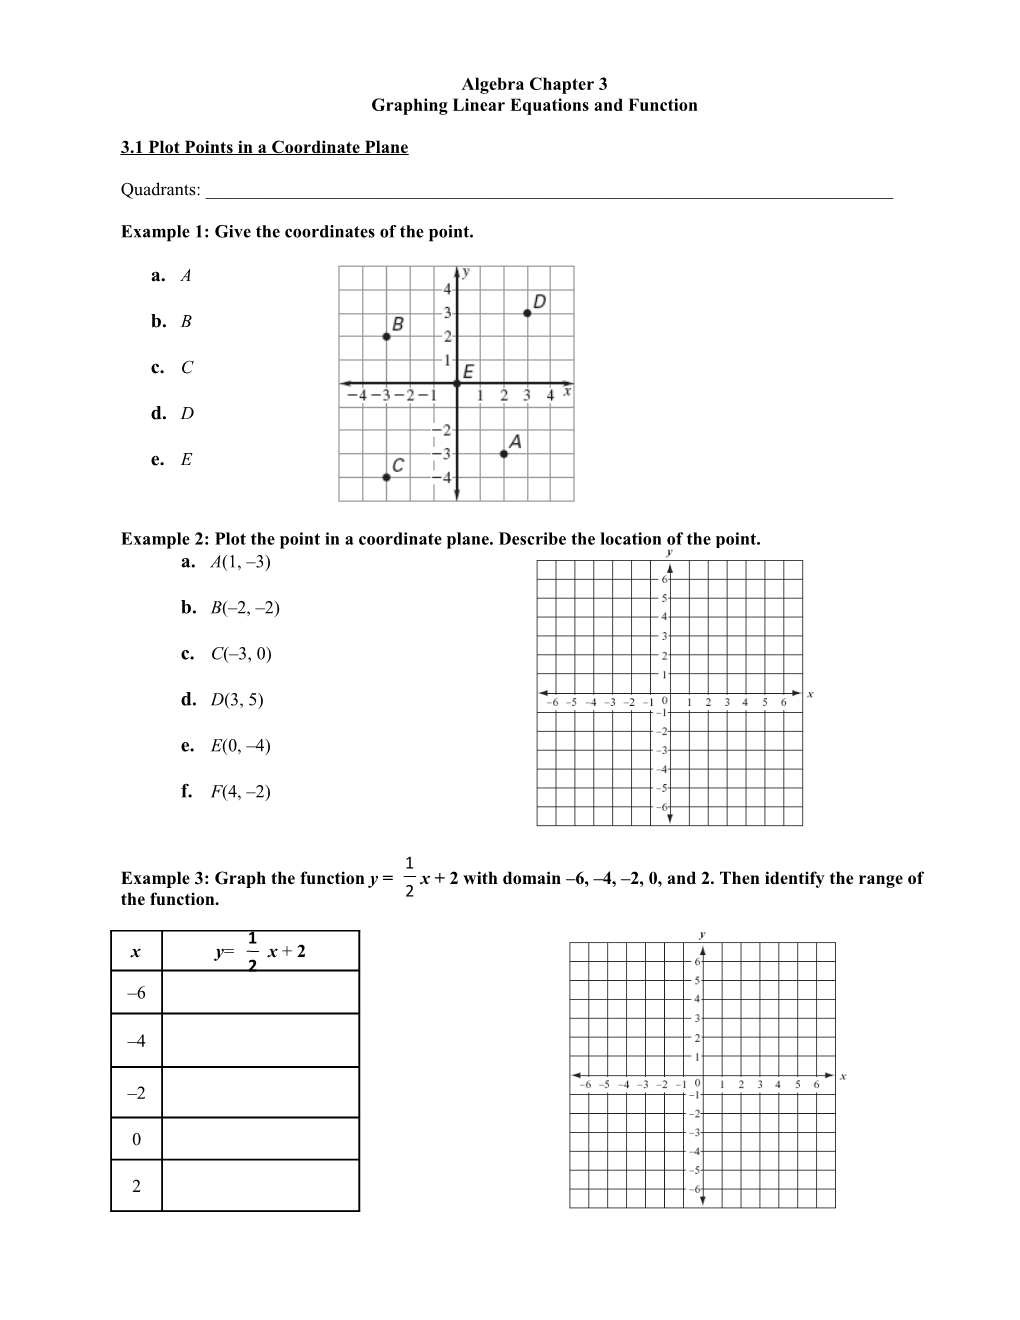 Graphing Linear Equations and Function